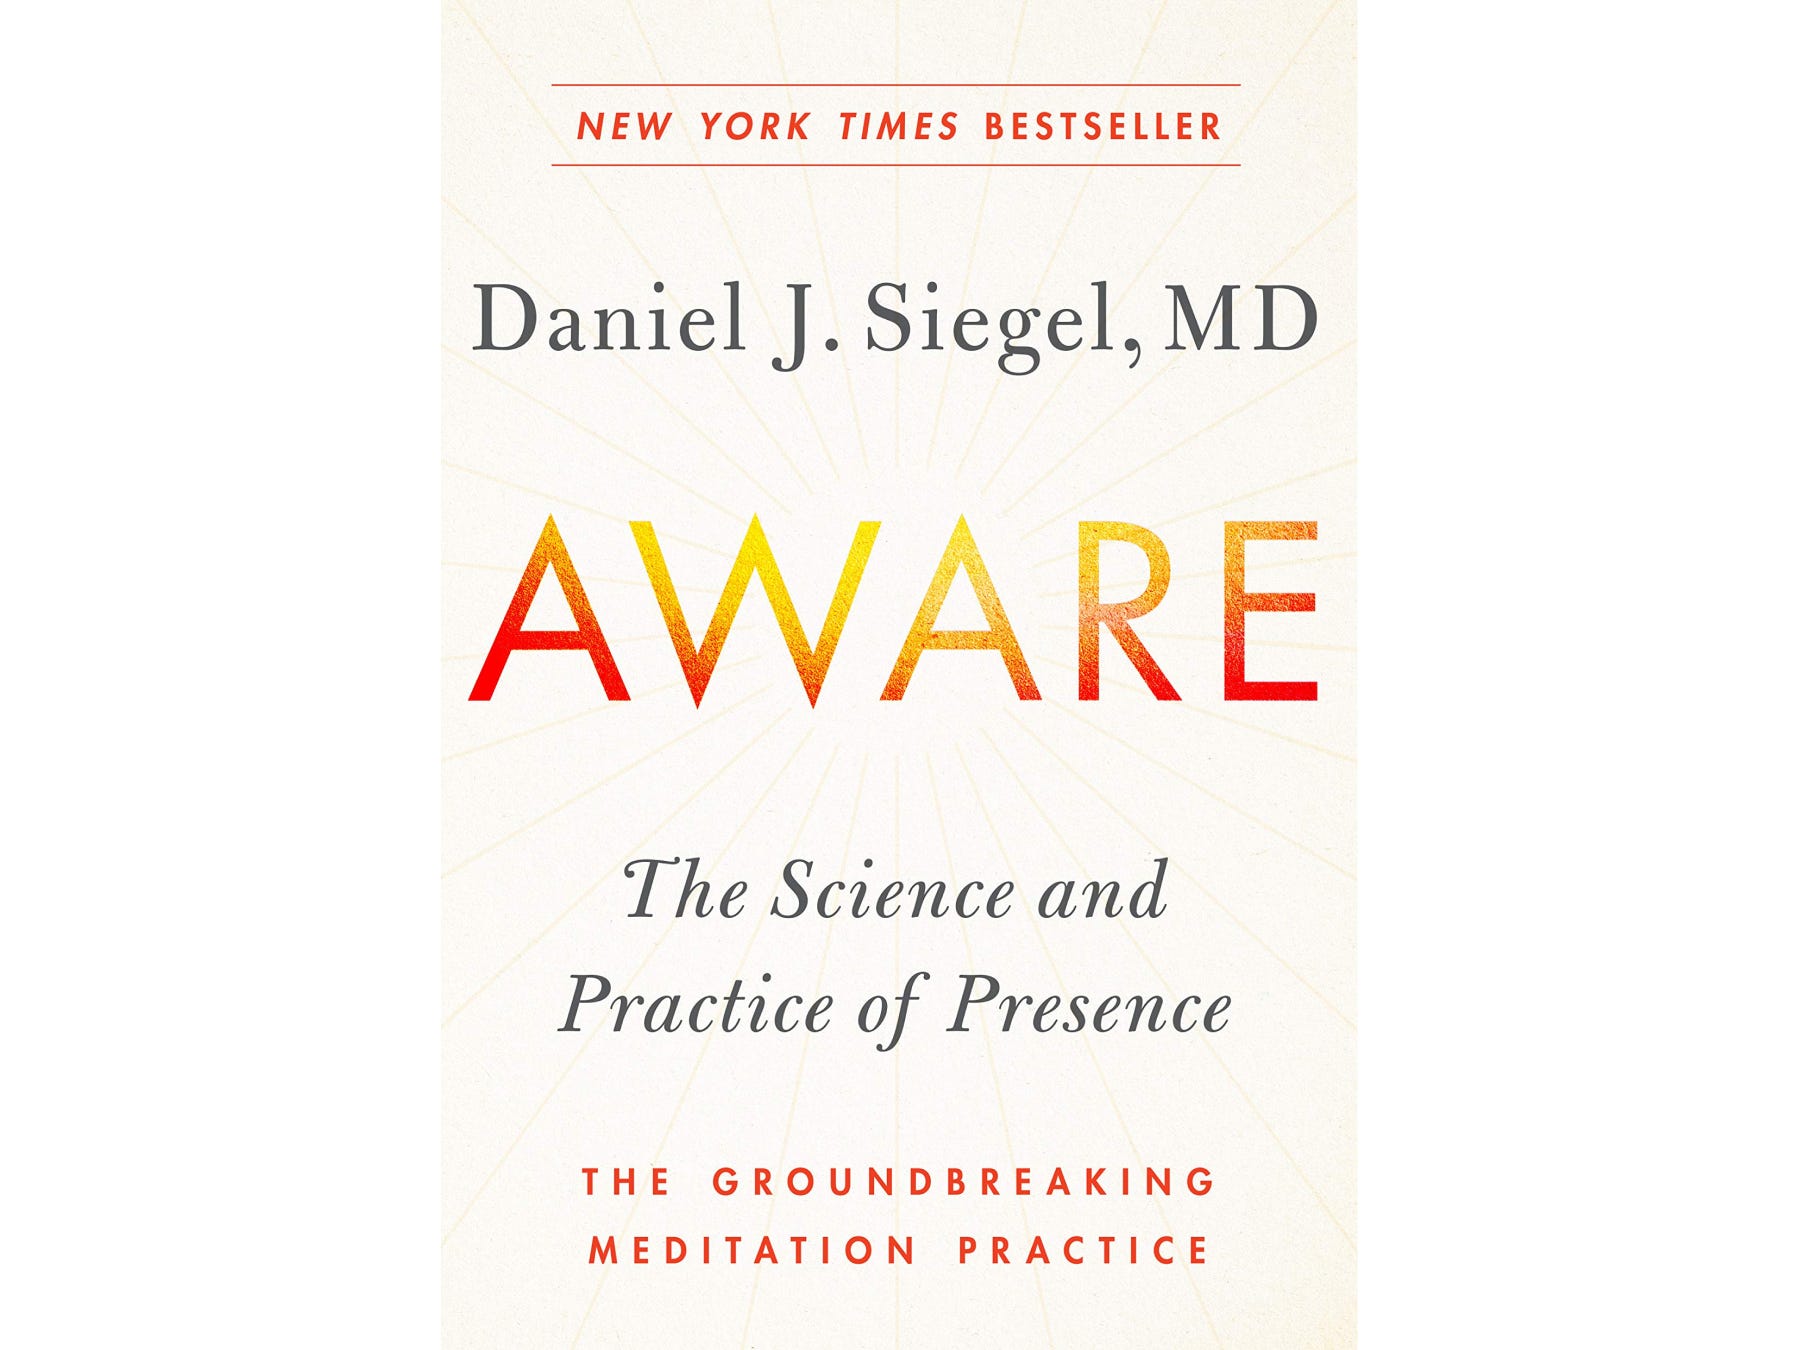 Aware: The Science and Practice of Presence-The Groundbreaking Meditation Practice by Daniel J. Siegel